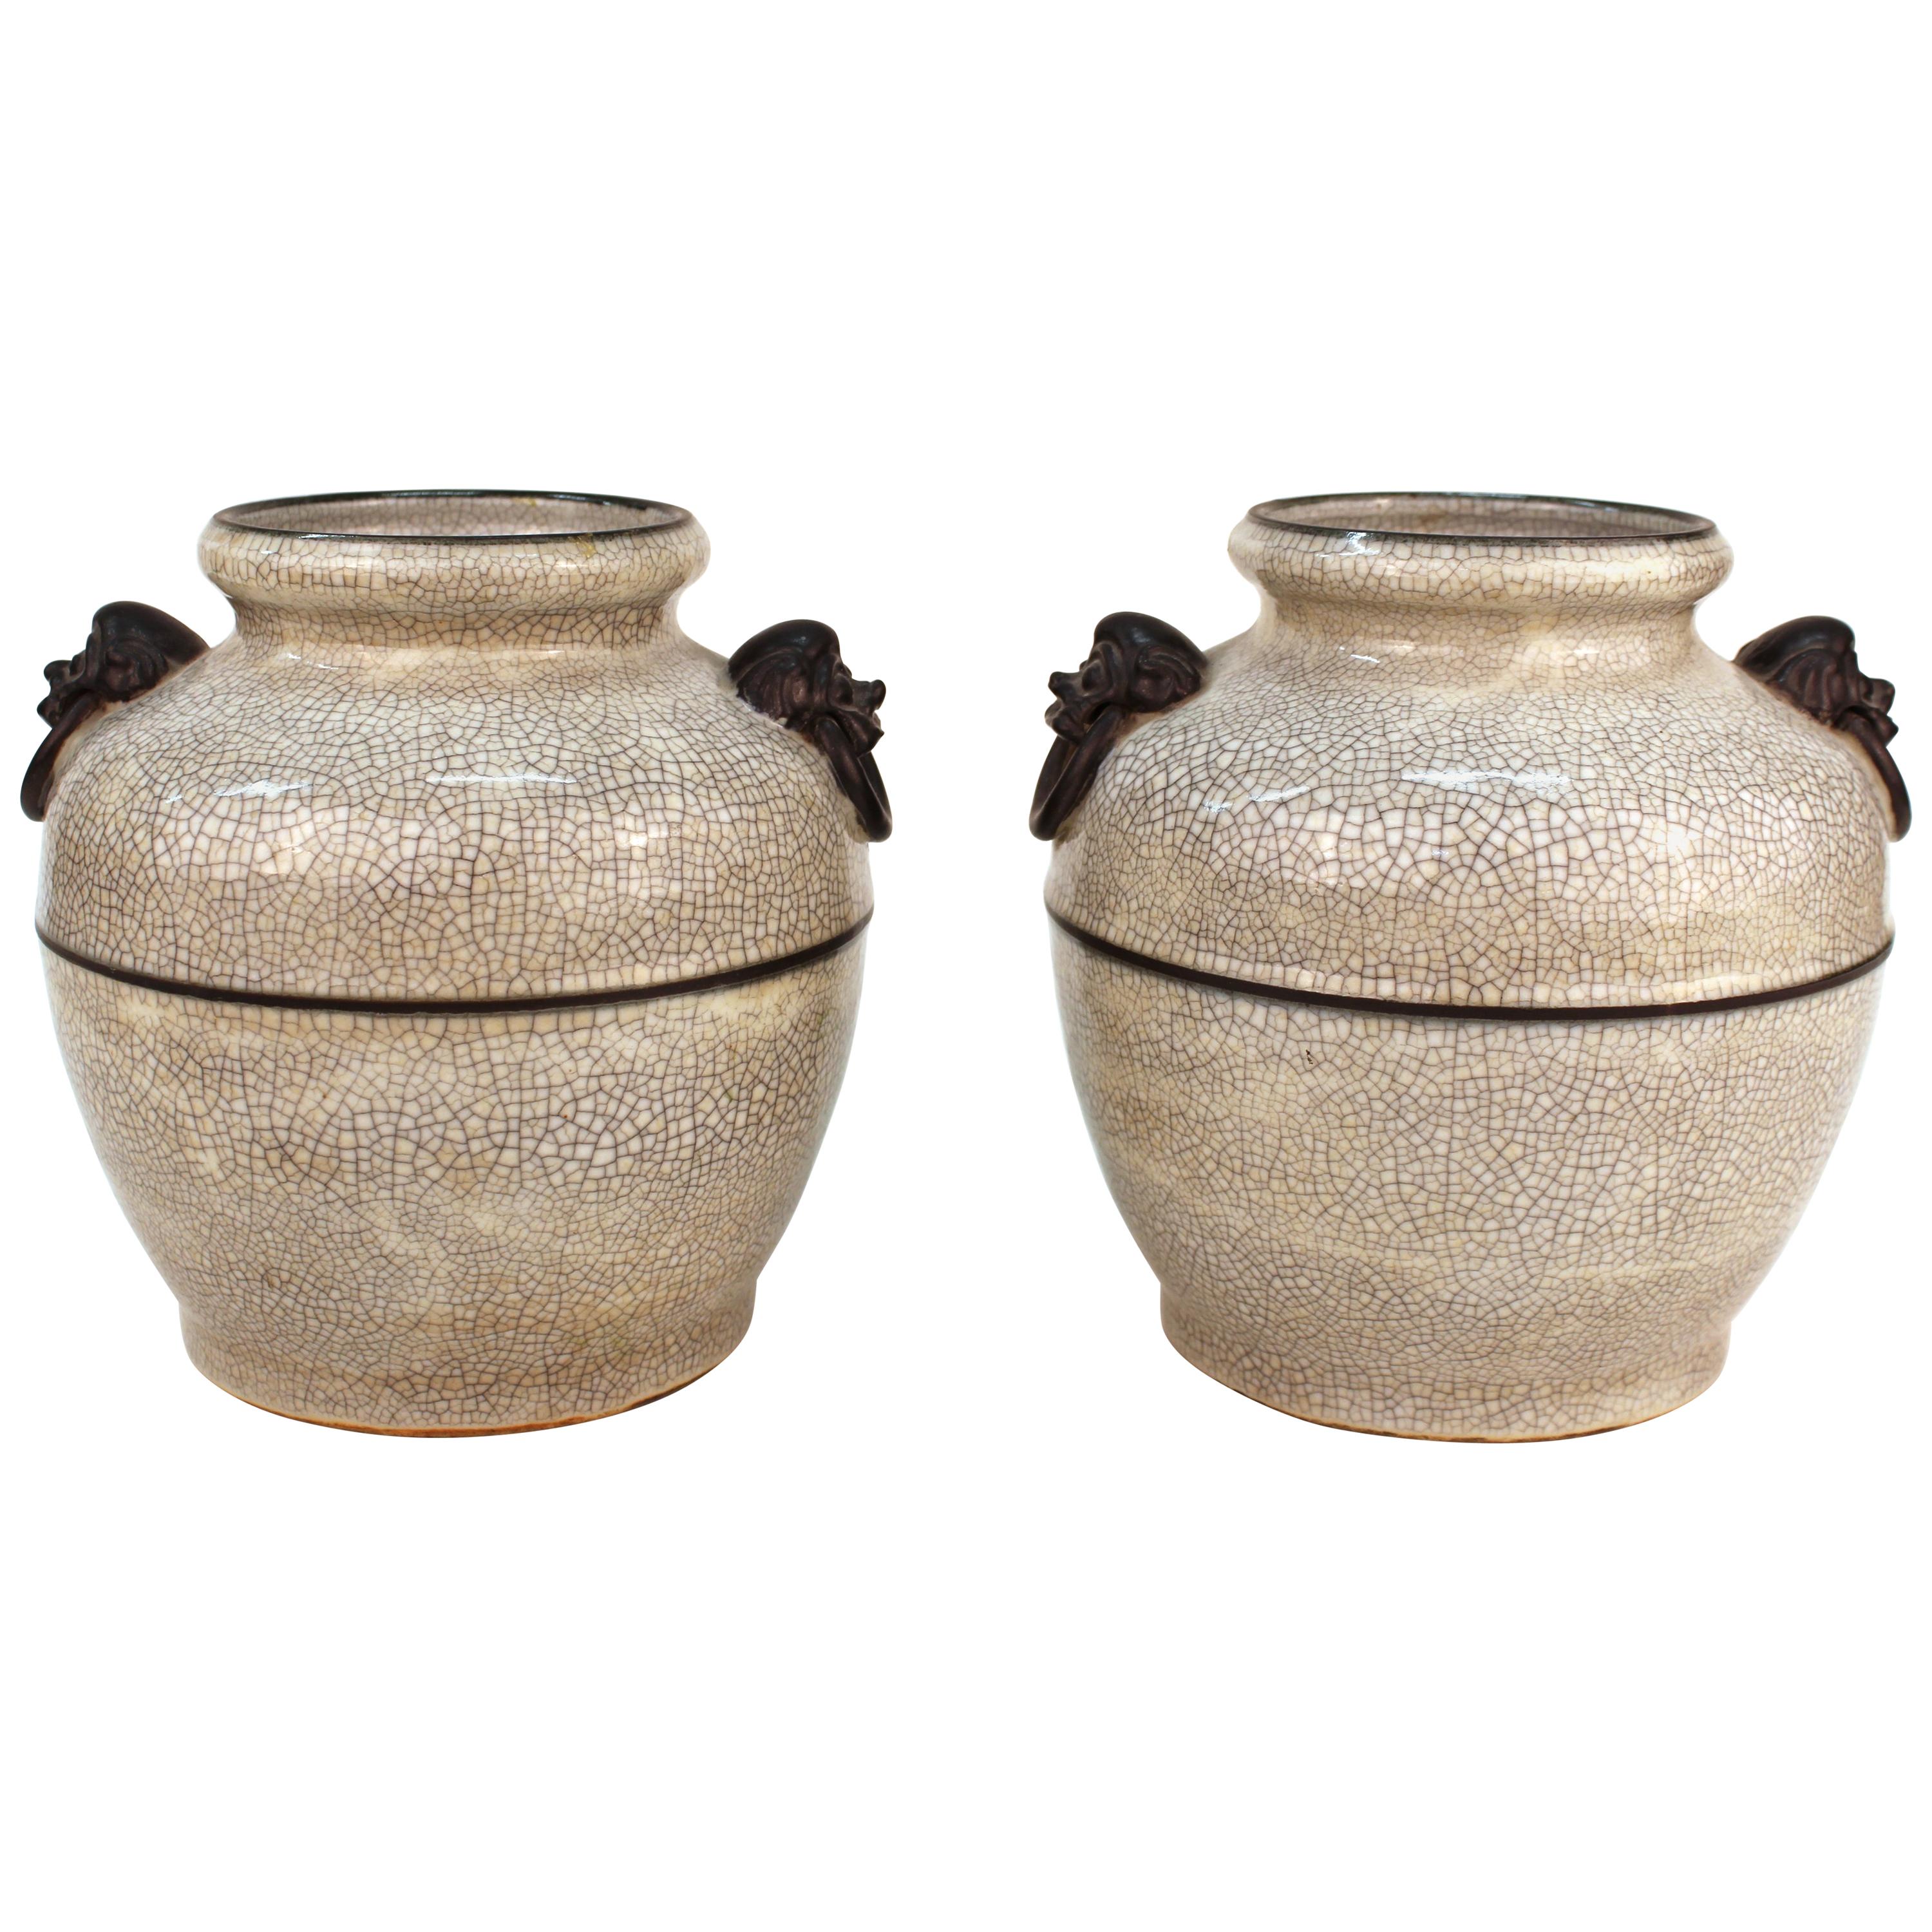 Pair of Asian Style Ceramic Jars or Urns with Metal Handles